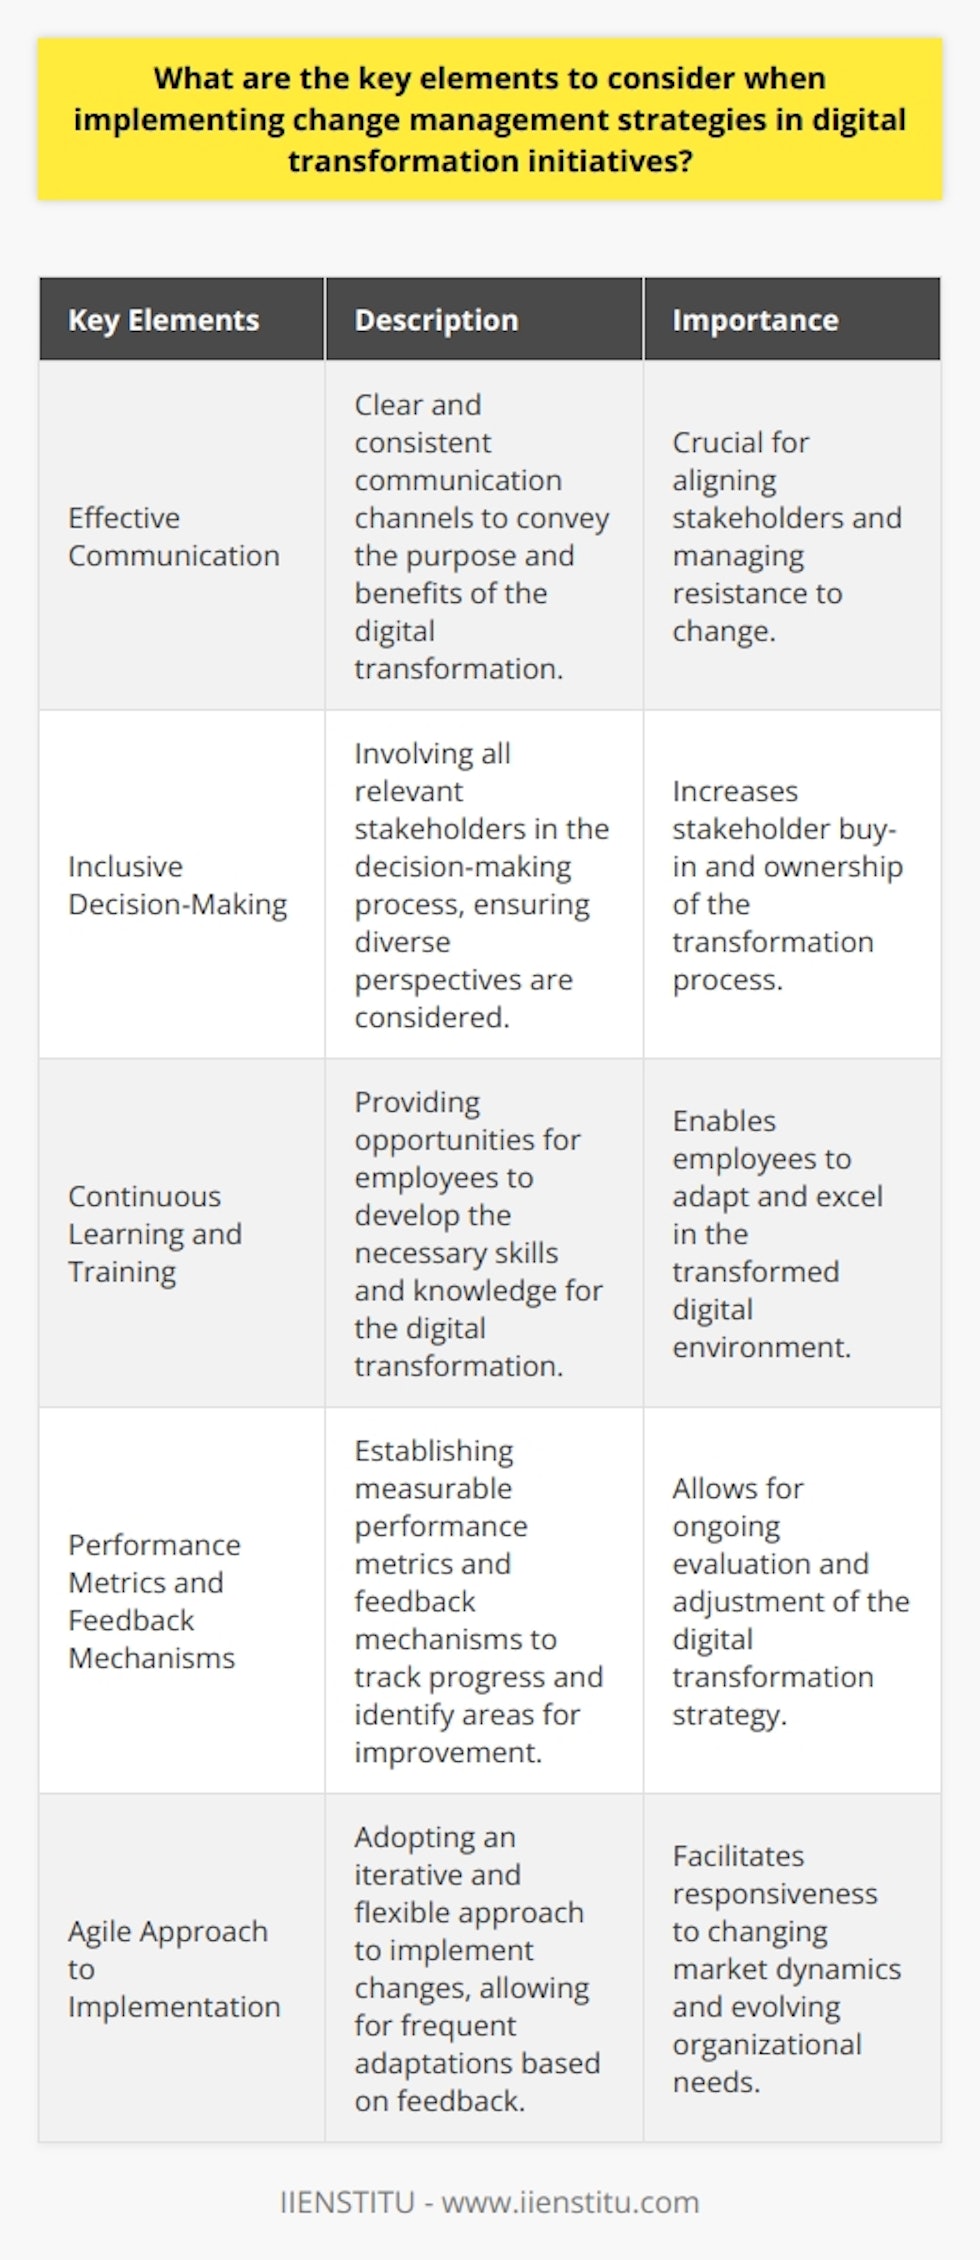 These key elements are crucial to consider when implementing change management strategies in digital transformation initiatives. By focusing on effective communication, inclusive decision-making, continuous learning and training, performance metrics and feedback mechanisms, and an agile approach to implementation, organizations can increase the likelihood of a successful digital transformation.